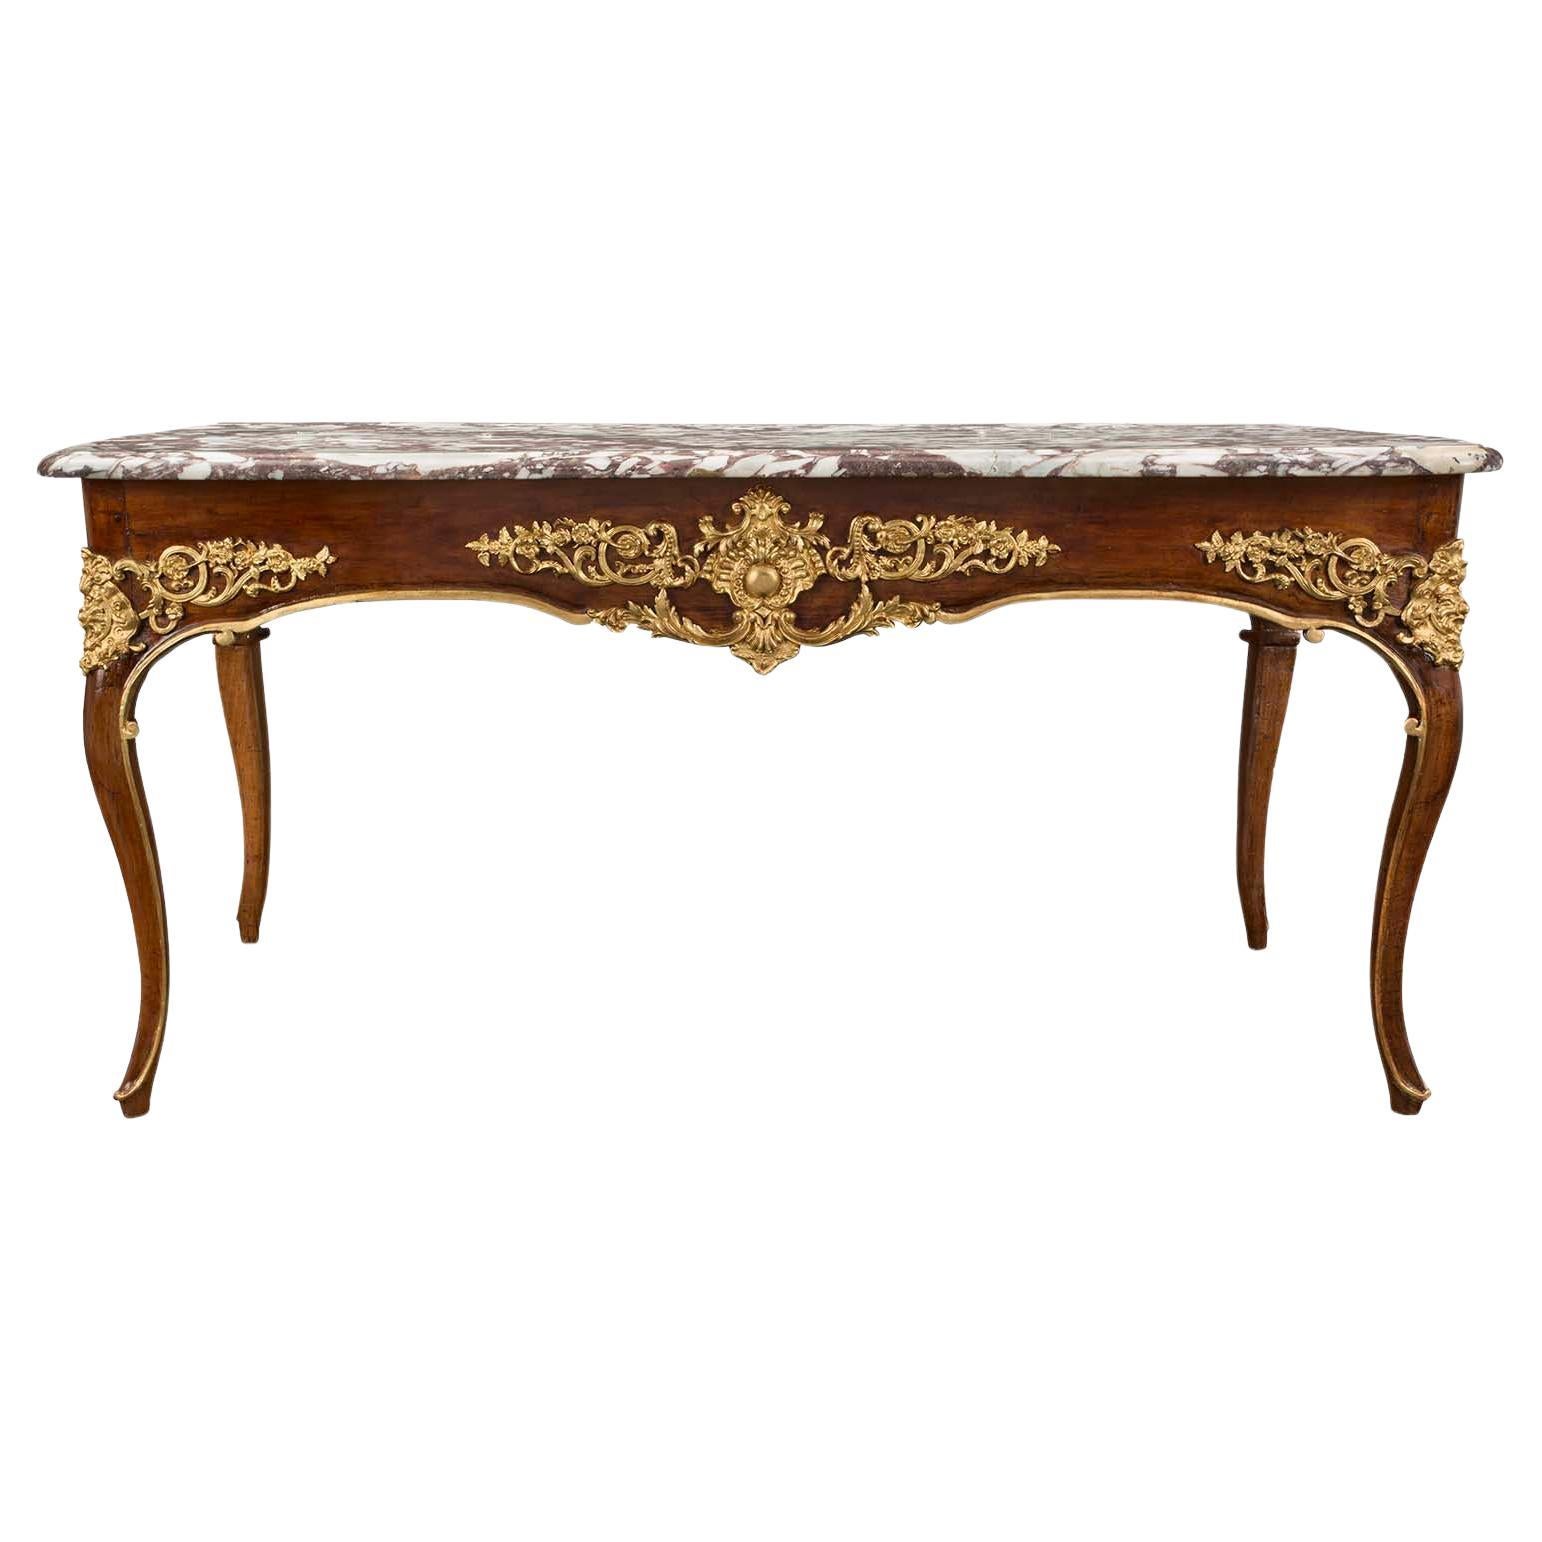 Continental 18th Century Louis XV Period Rectangular Walnut Centre Table For Sale